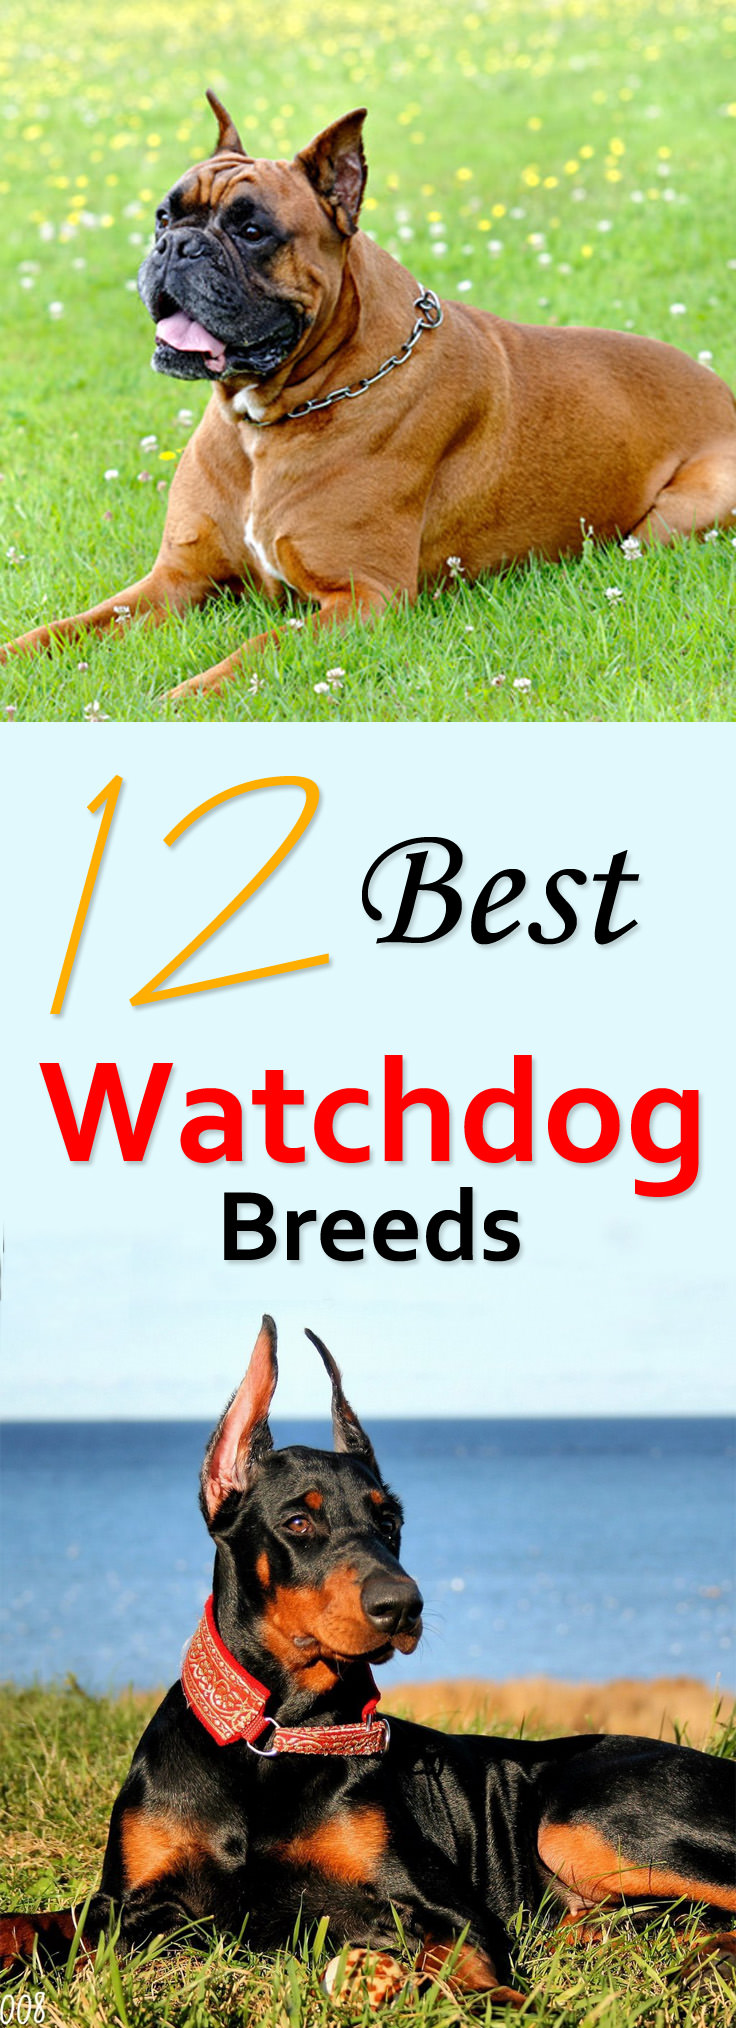 These 12 Best Watchdog Breeds are most suitable as watchdogs. We have chosen dogs in this list by their physical strength and temperament and also examined whether they are brave, loyal and obedient.